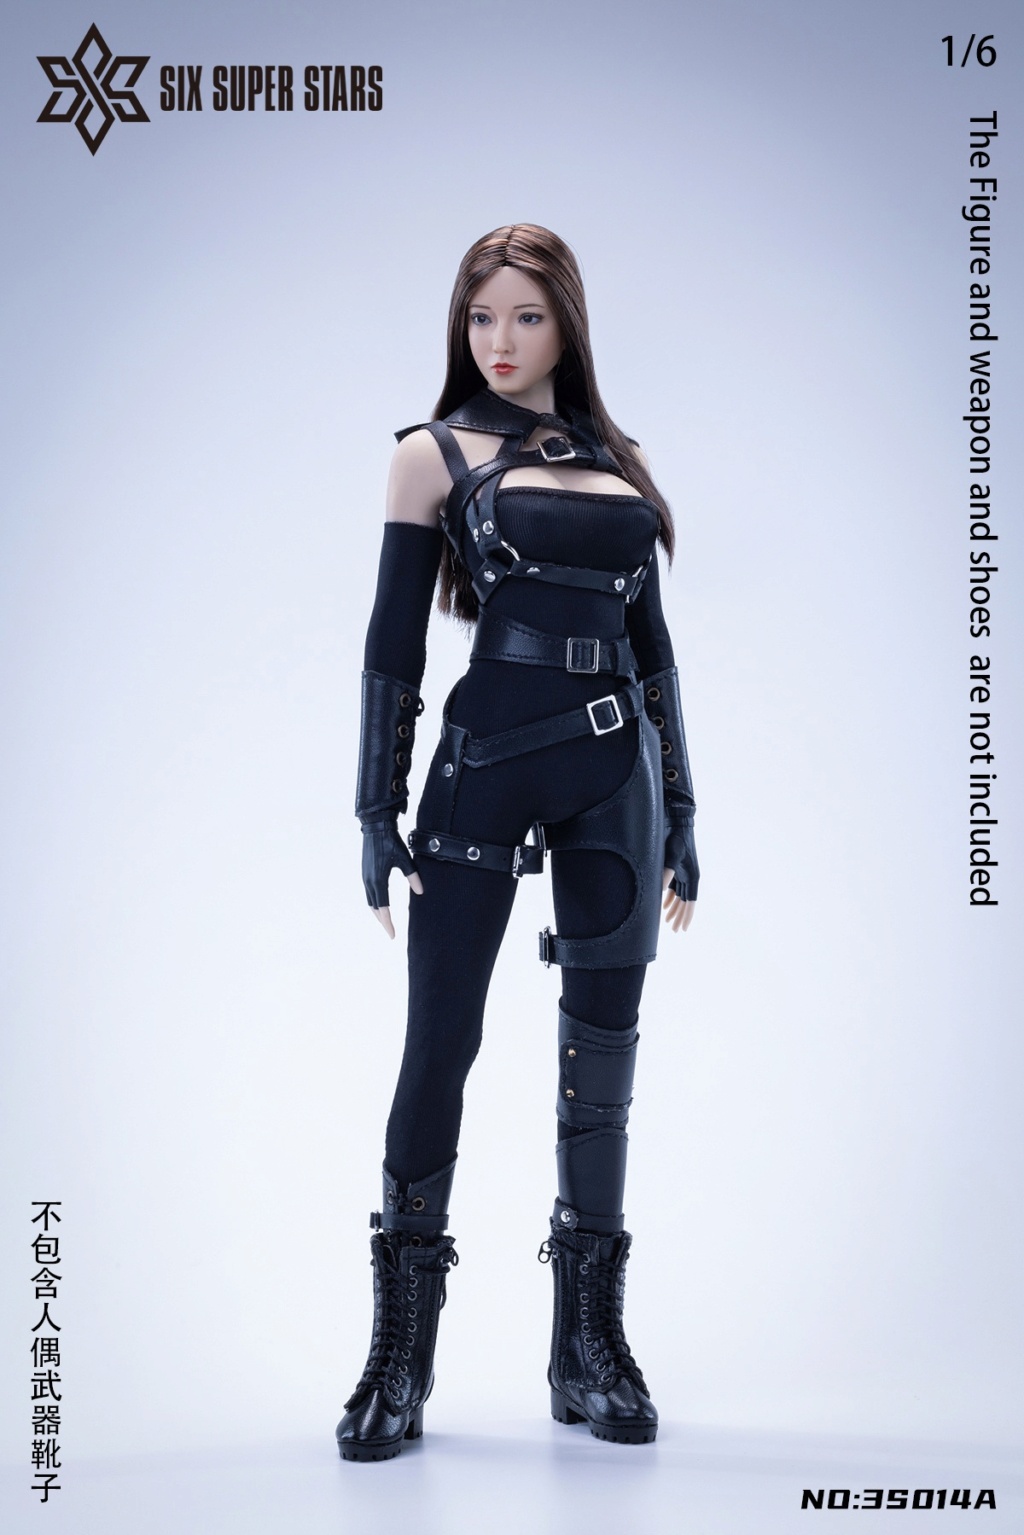 female - NEW PRODUCT: Six Super Stars: 1/6 Shooter Tights Female Soldier Dolls Without HeadCarving Gel Body 3S014A/B 10190411